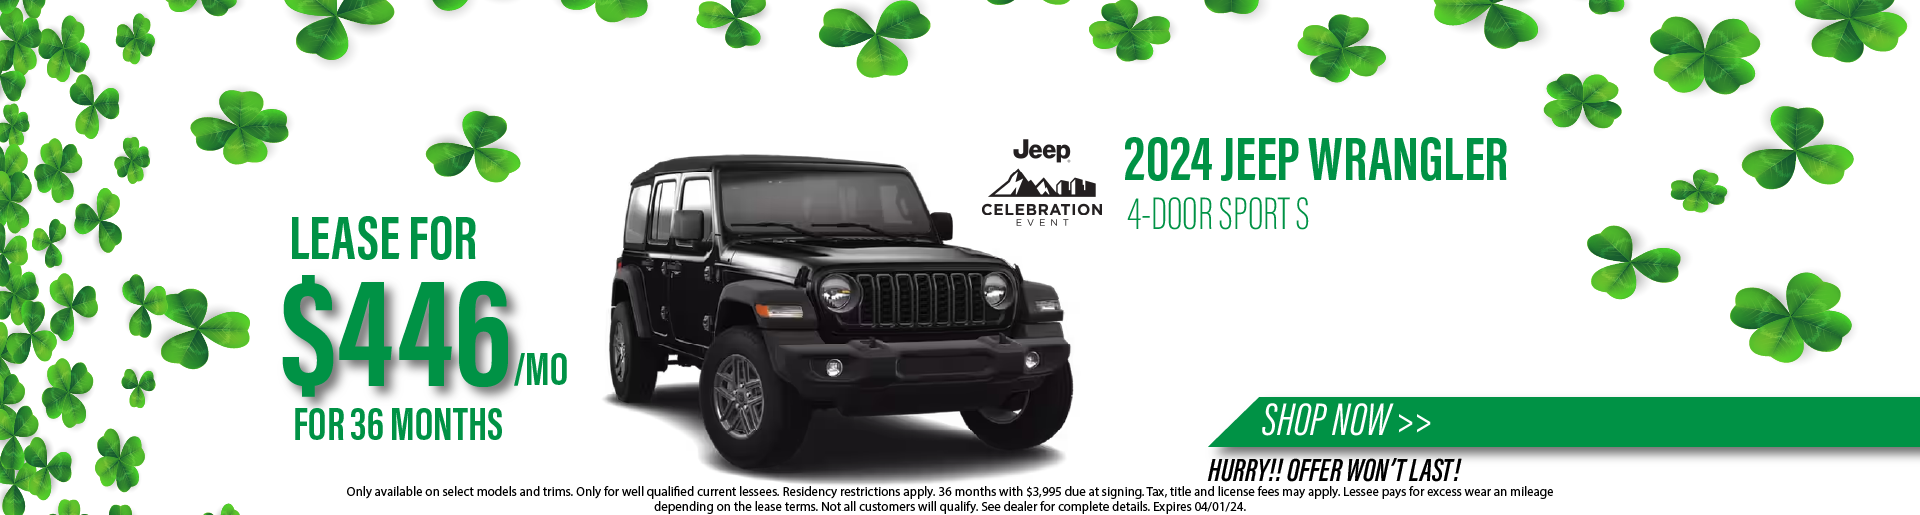 2024 Jeep Wrangler lease special